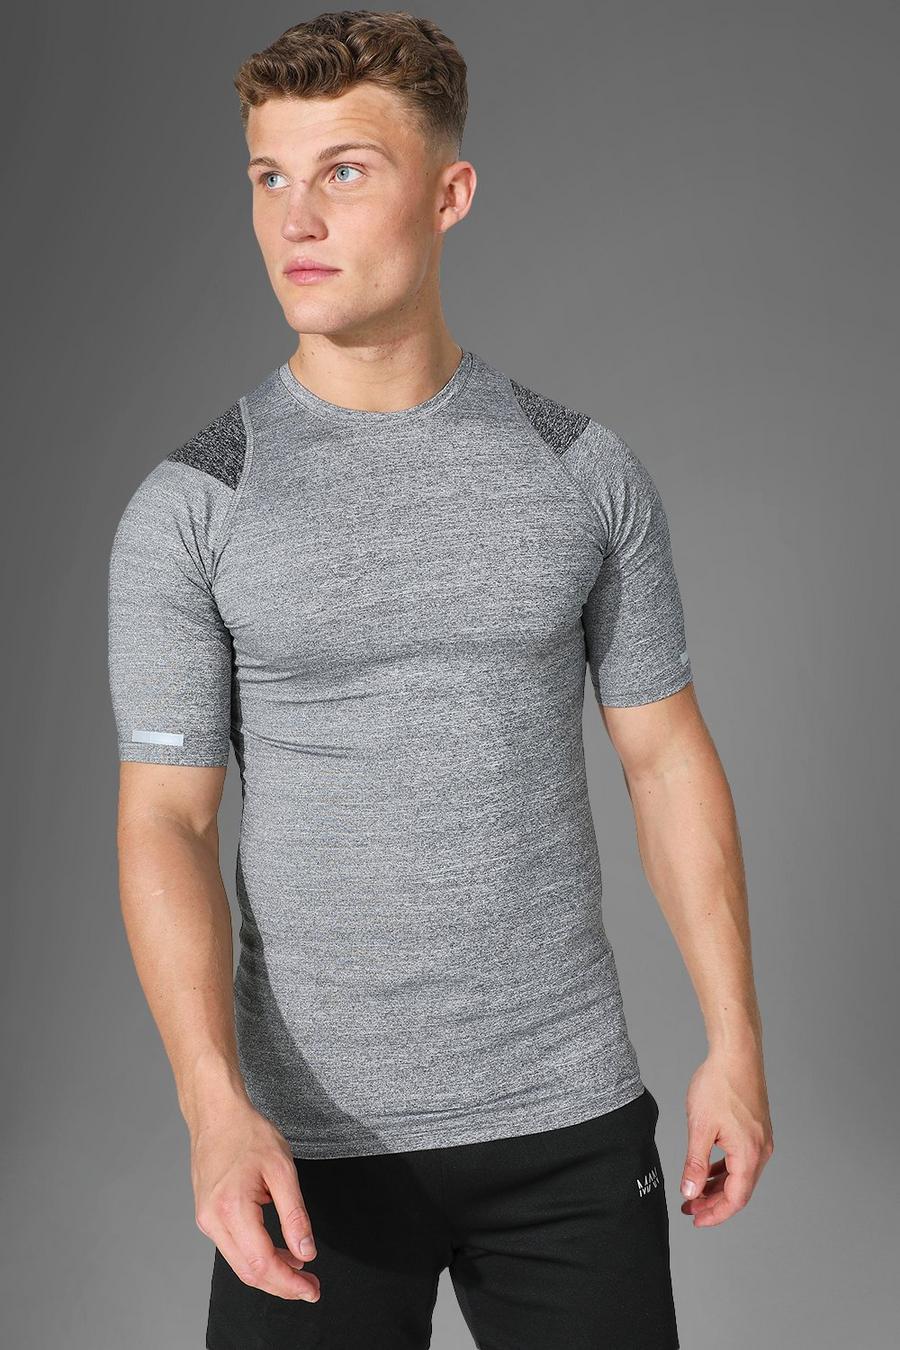 T-shirt Man Active Gym a compressione a contrasto, Charcoal image number 1